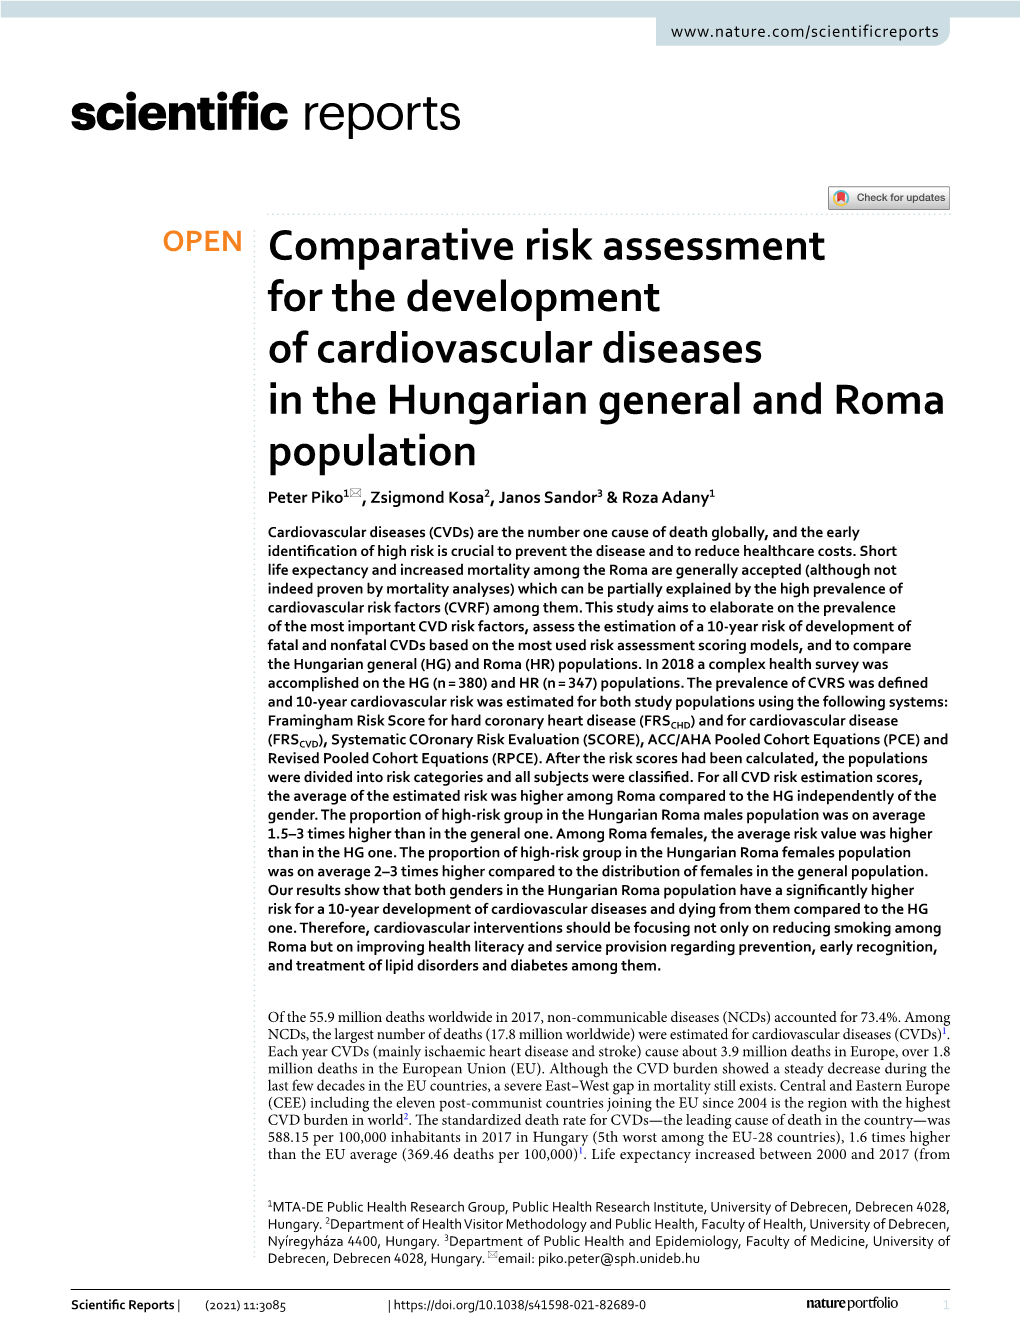 Comparative Risk Assessment for the Development of Cardiovascular